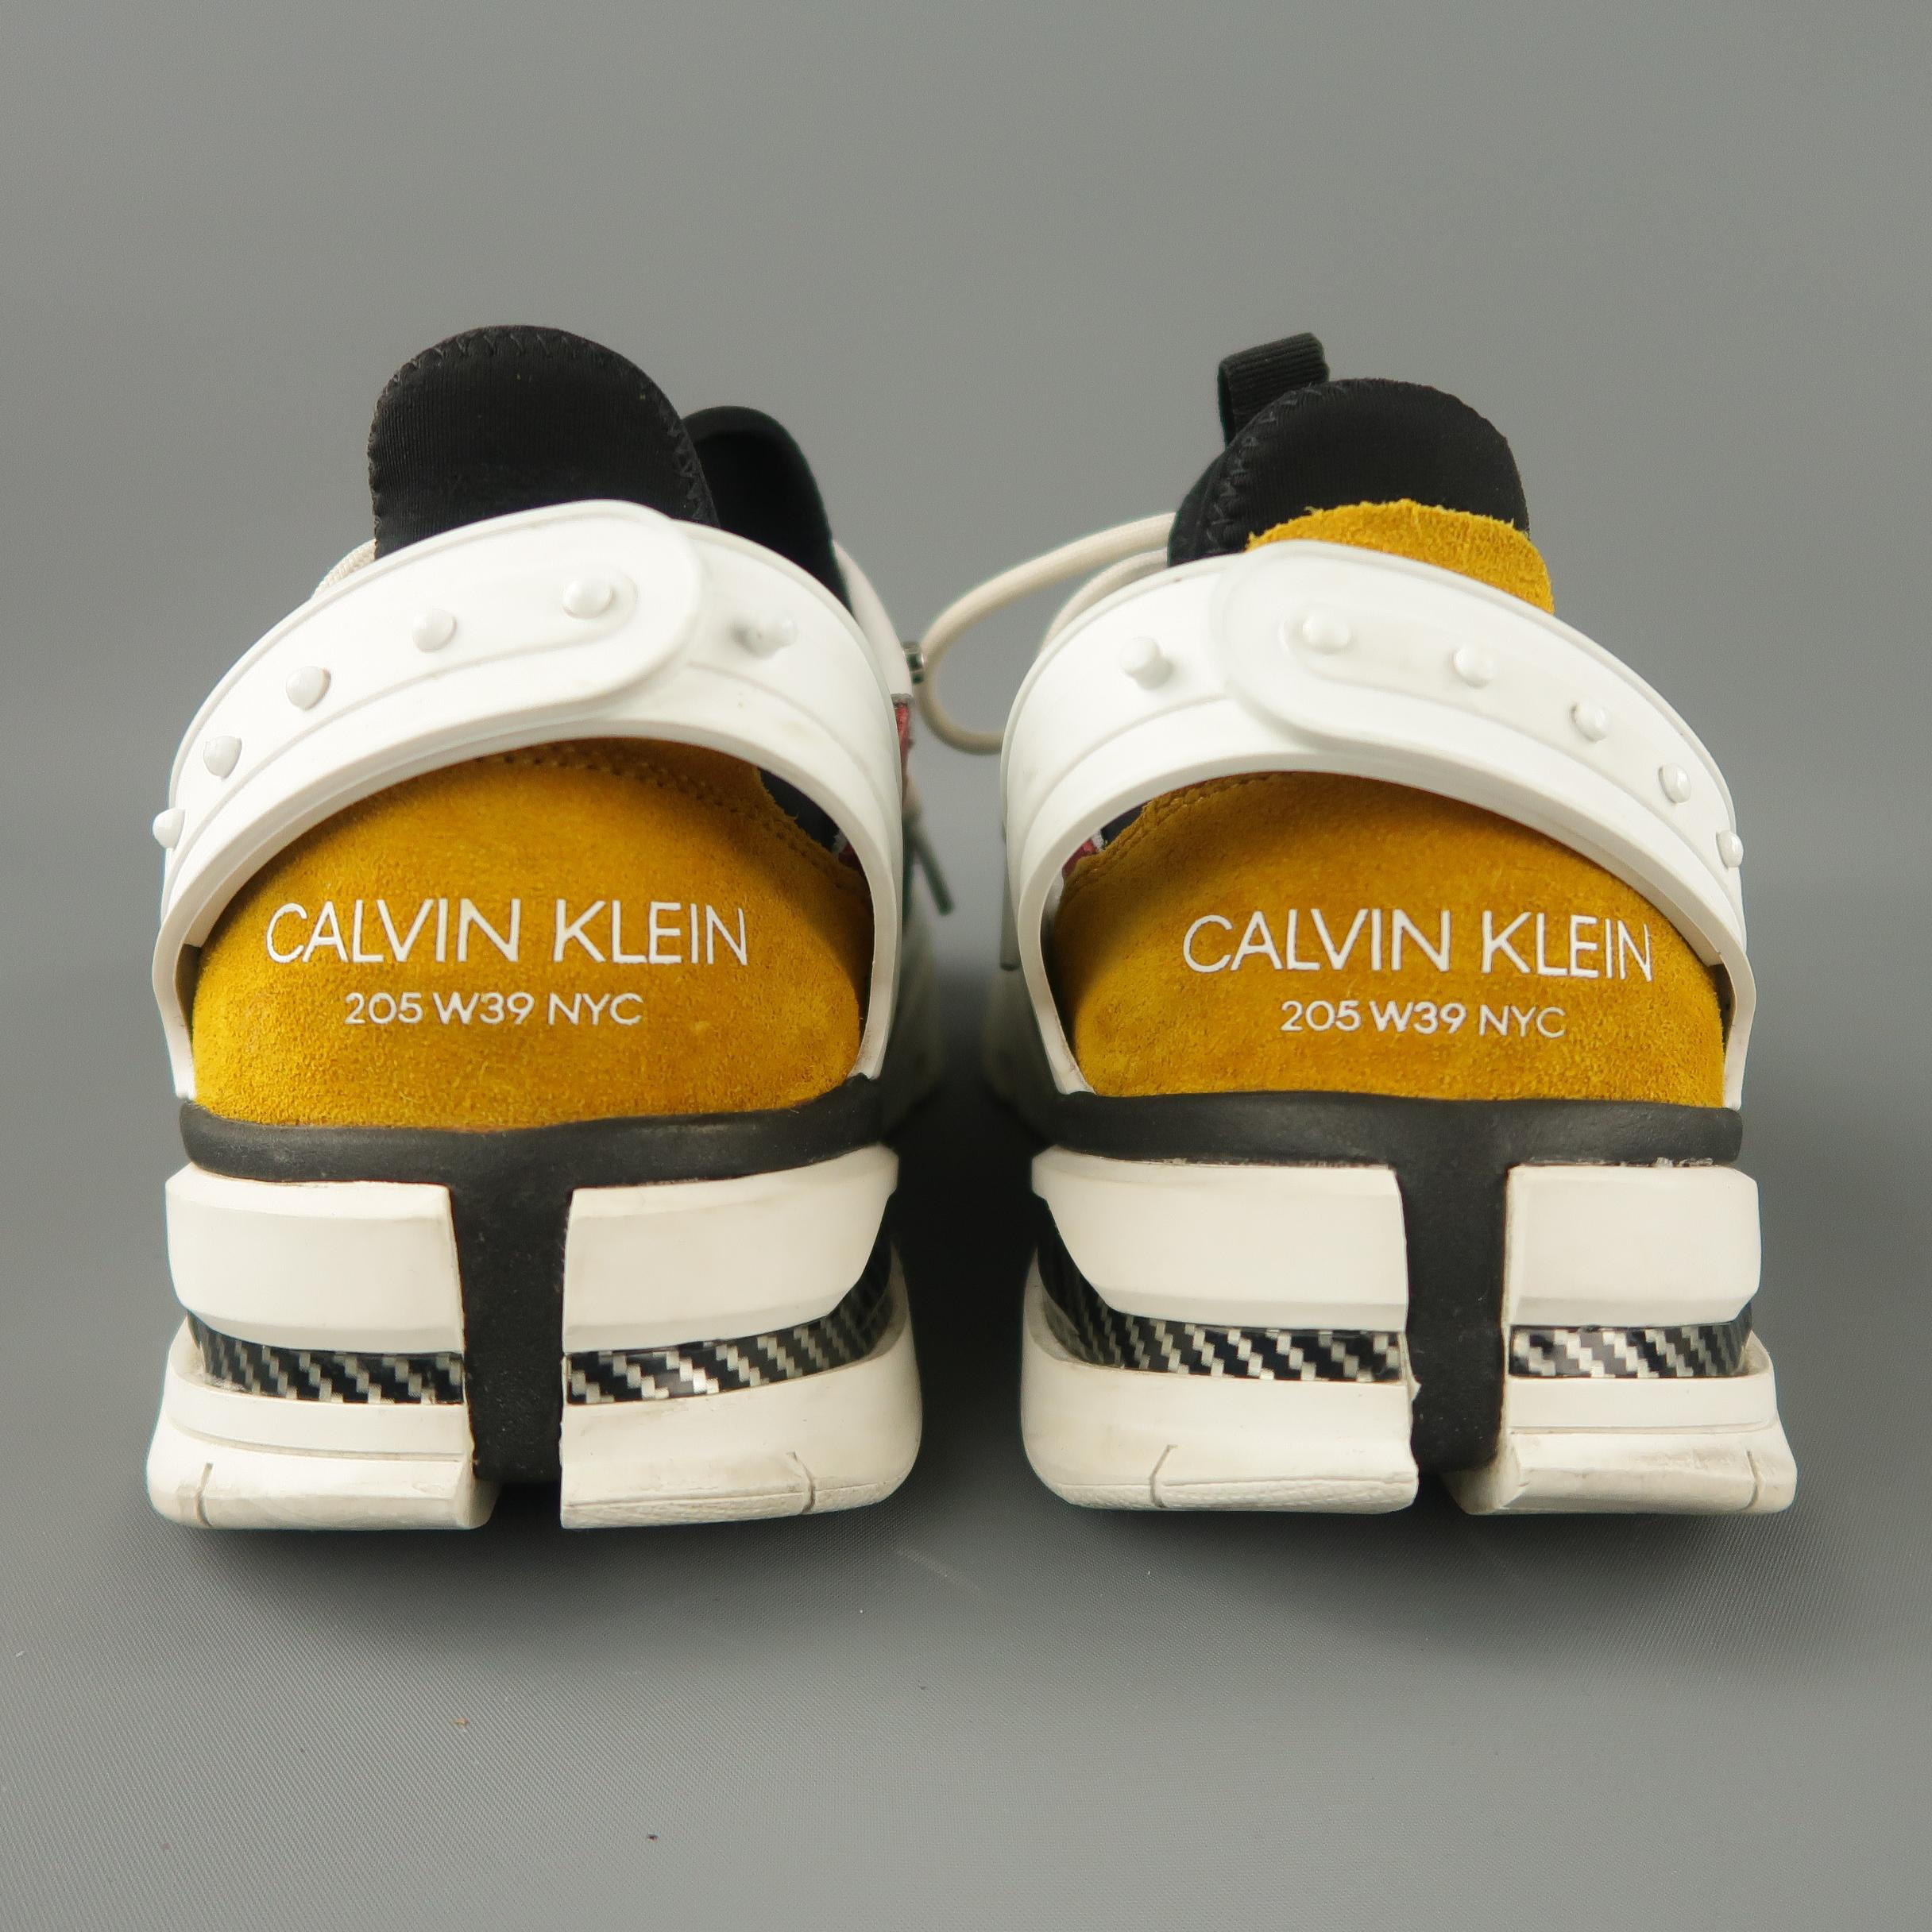 CALVIN KLEIN 205W39NYC Size 10 White Color Block Leather Lace Up Sneakers $285.0 6